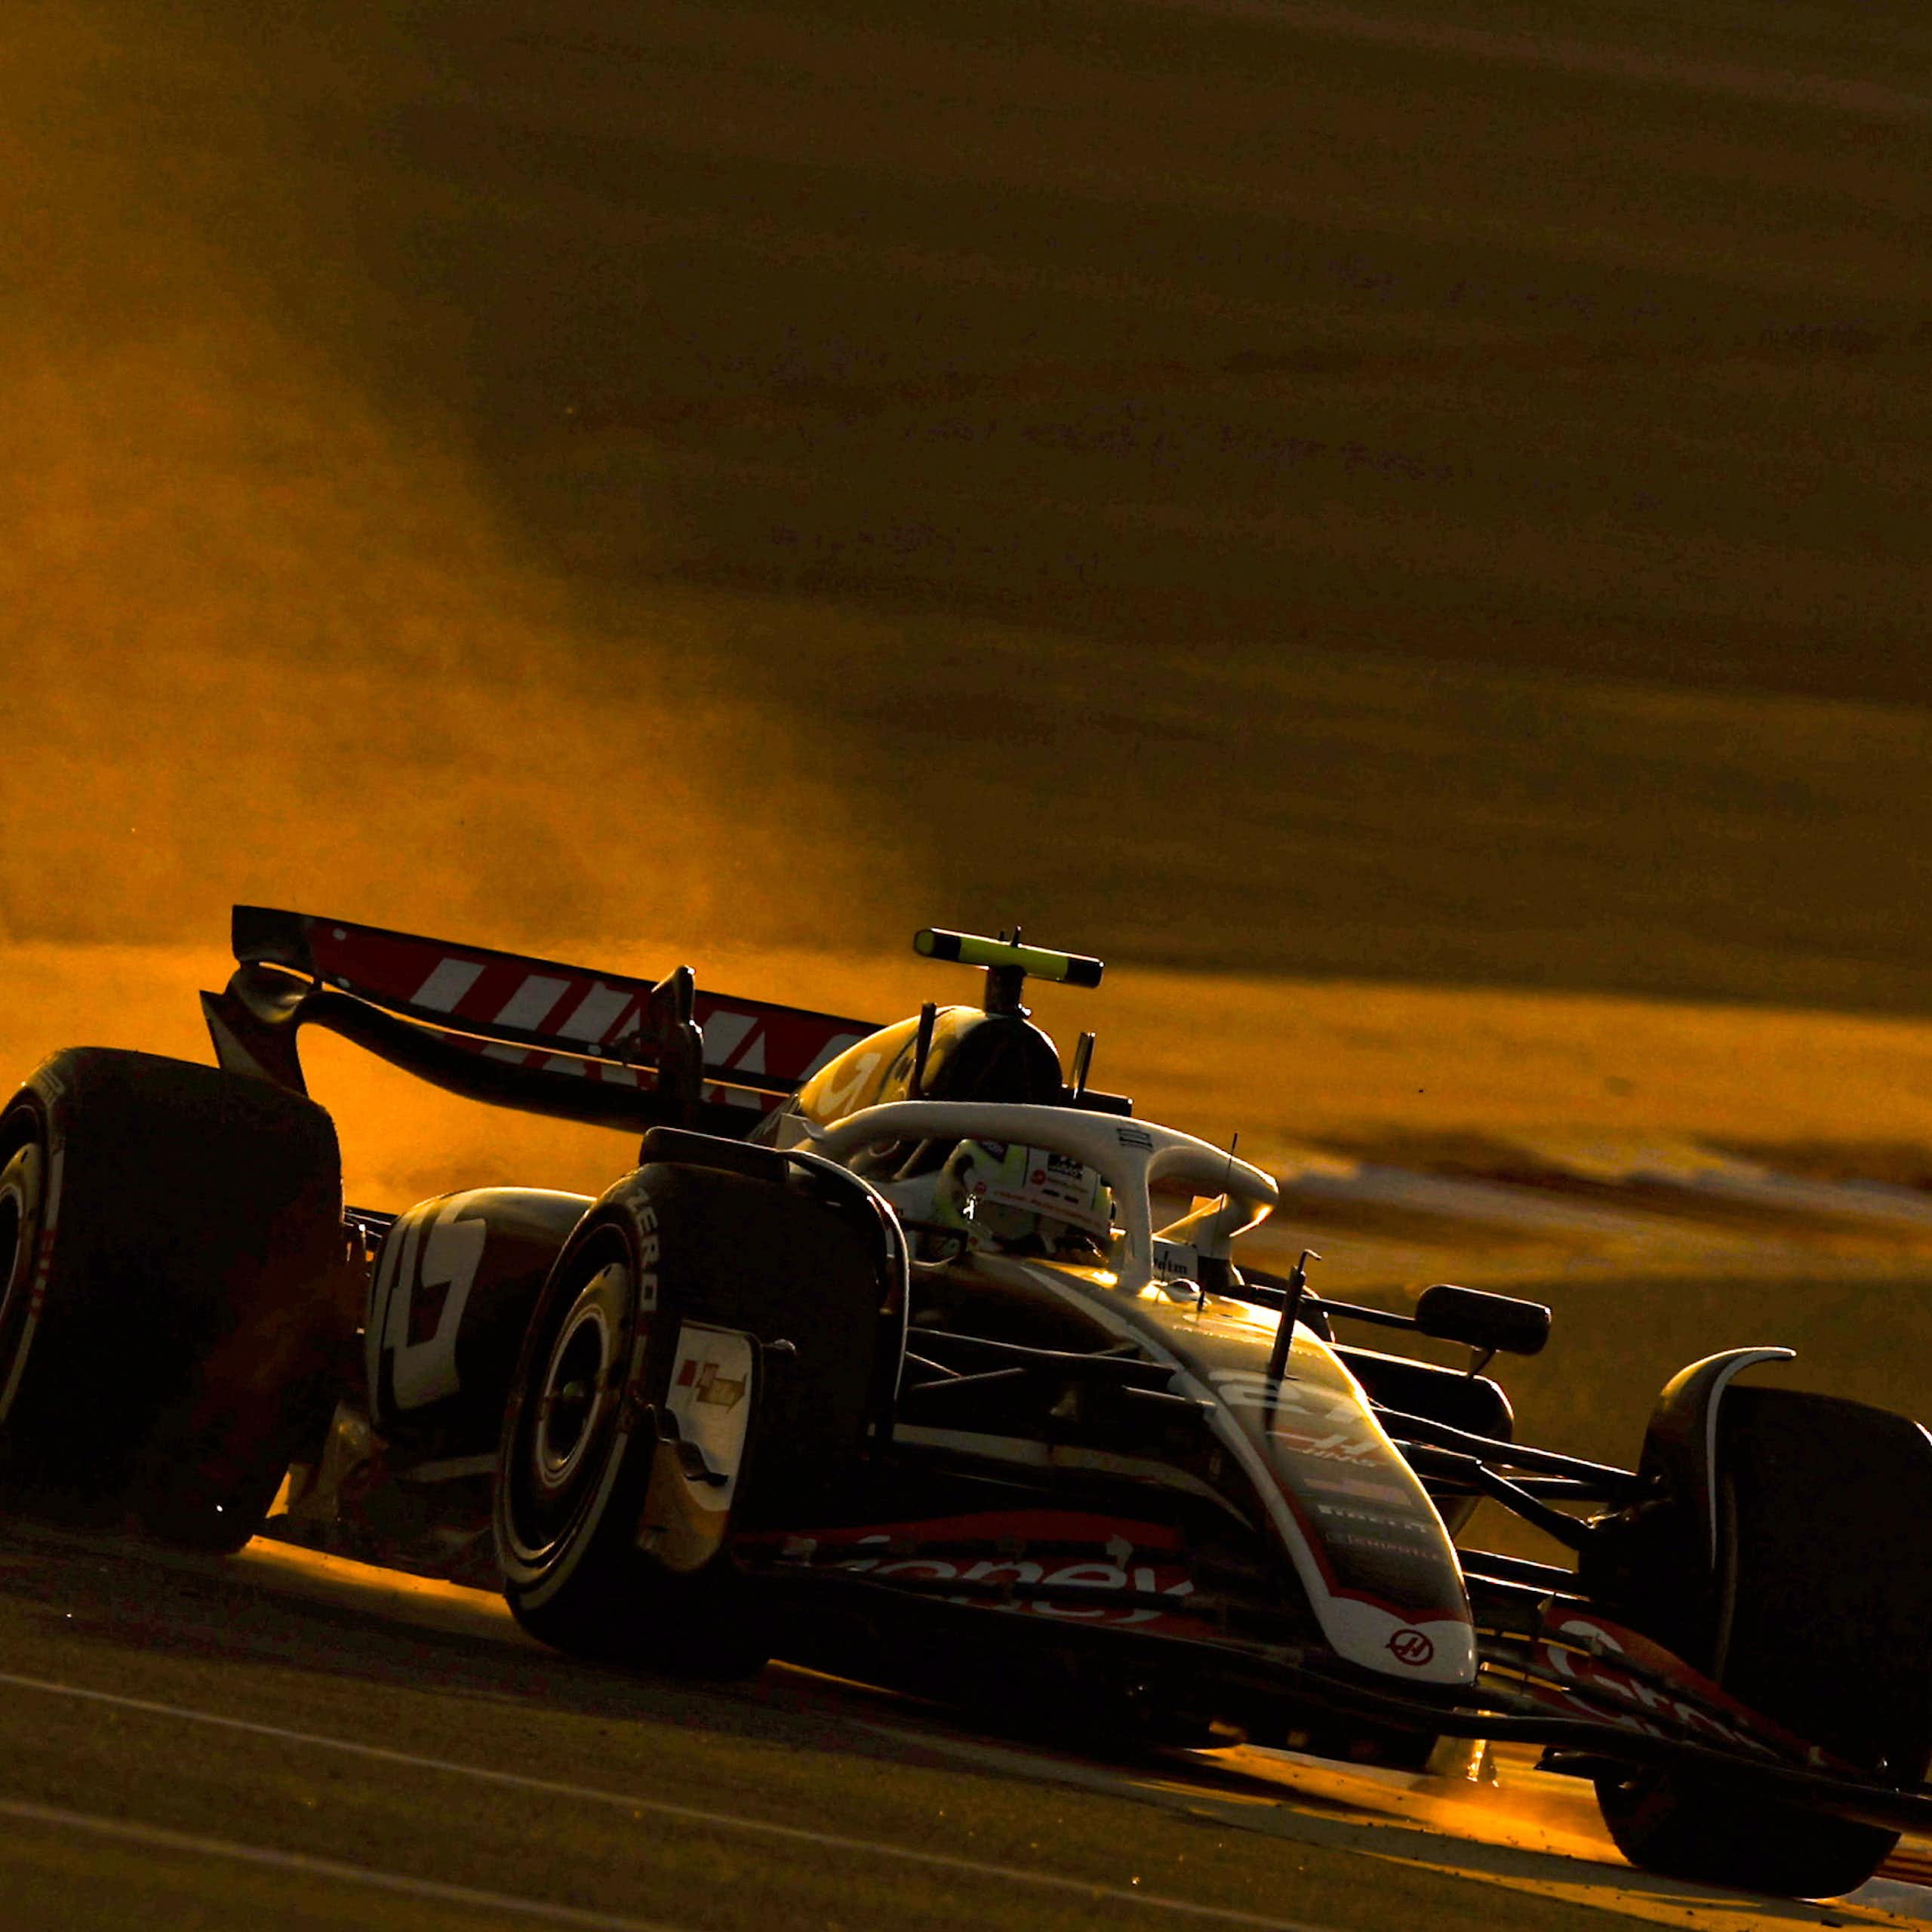 A Formula One car spits out fumes as it turns a corner